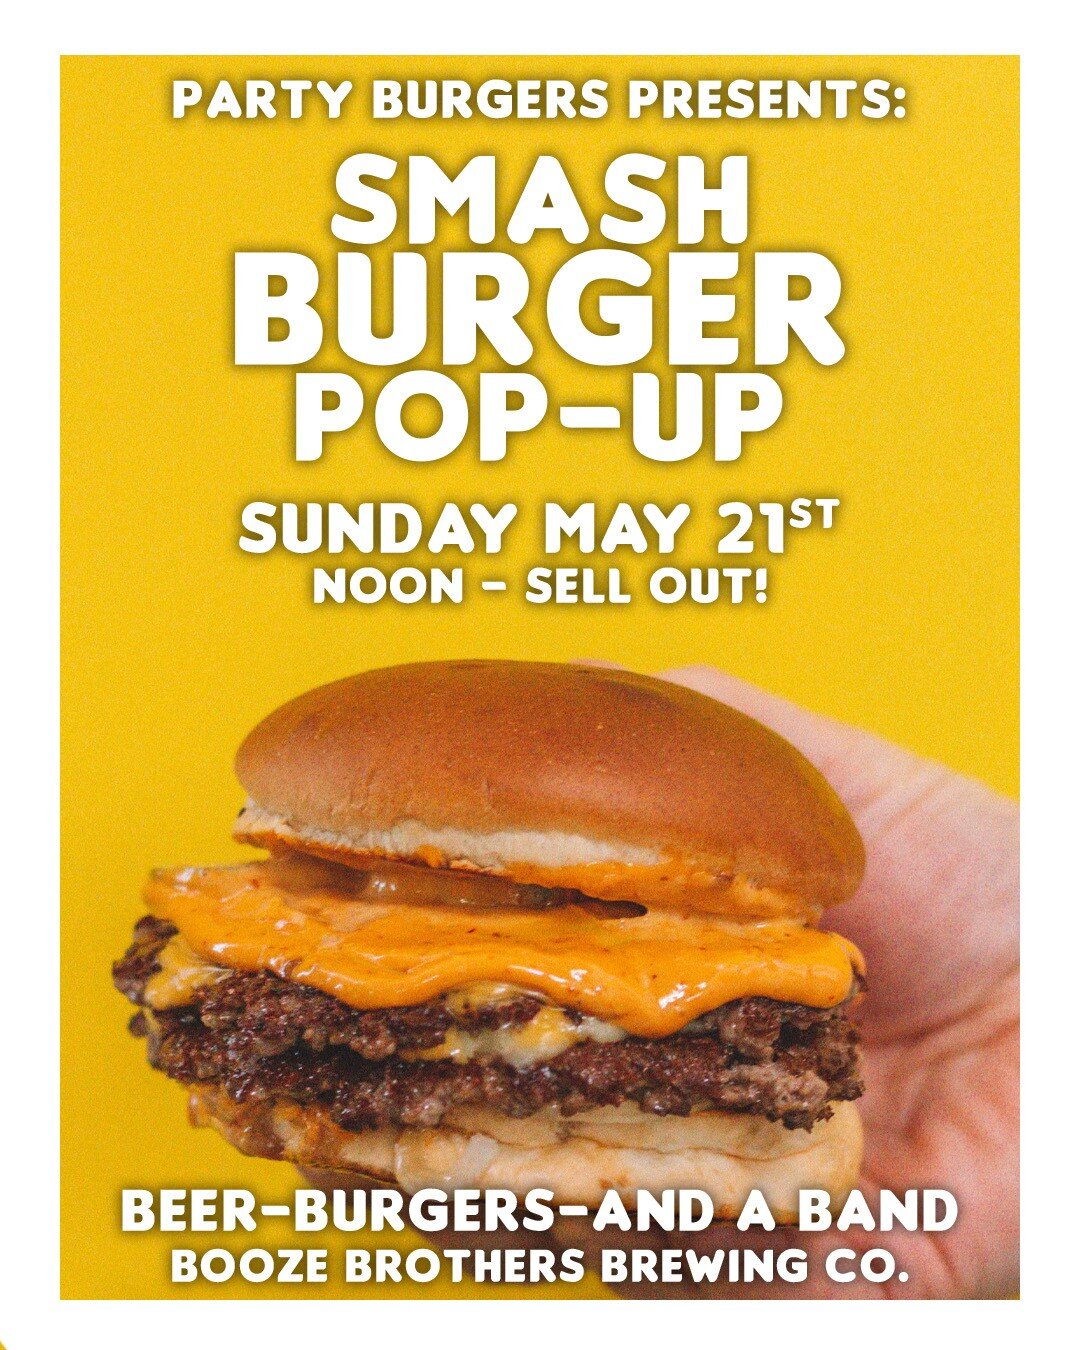 This Sunday! We are excited to have @party_burgers doing a smash burger pop up at our Vista taproom! 

They will be slinging Party Burgers starting at noon until they sell out!

We will also have live music from The Original Fake Cowboy starting at 2